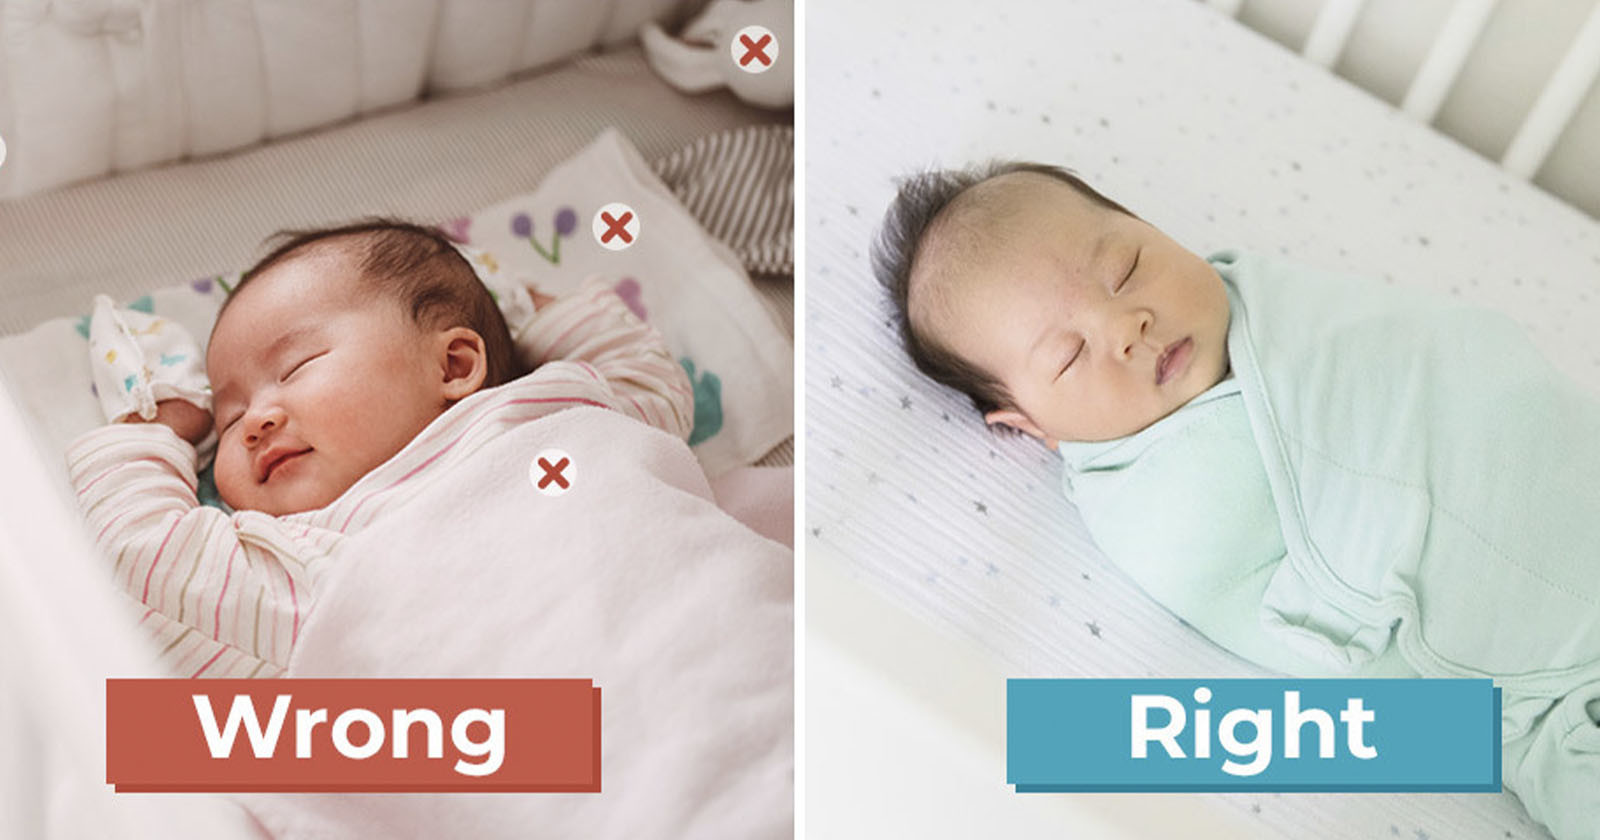  out stock photos sleeping babies show unsafe spaces 